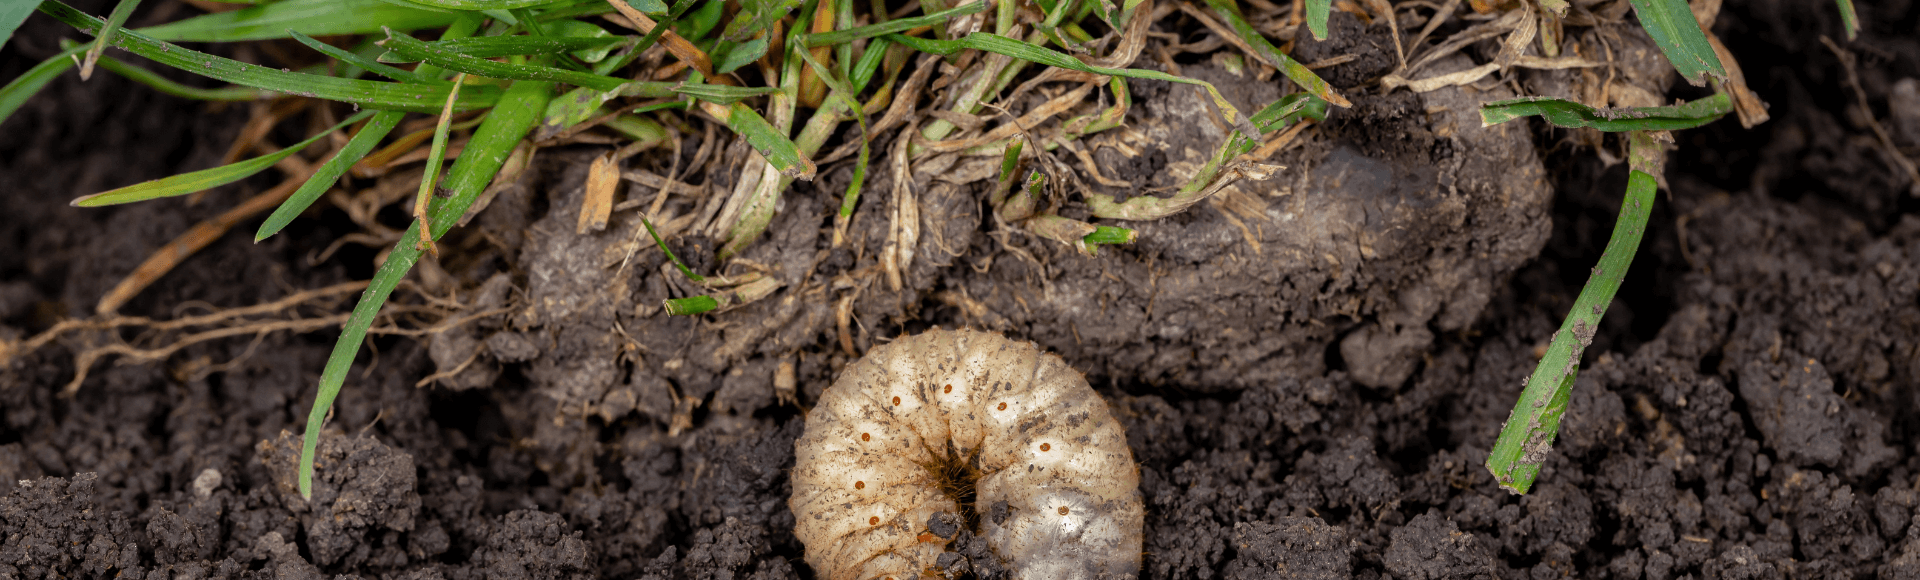 The Simple Guide To Diagnosing And Controlling A Grub Infestation - Pure  Turf LLC